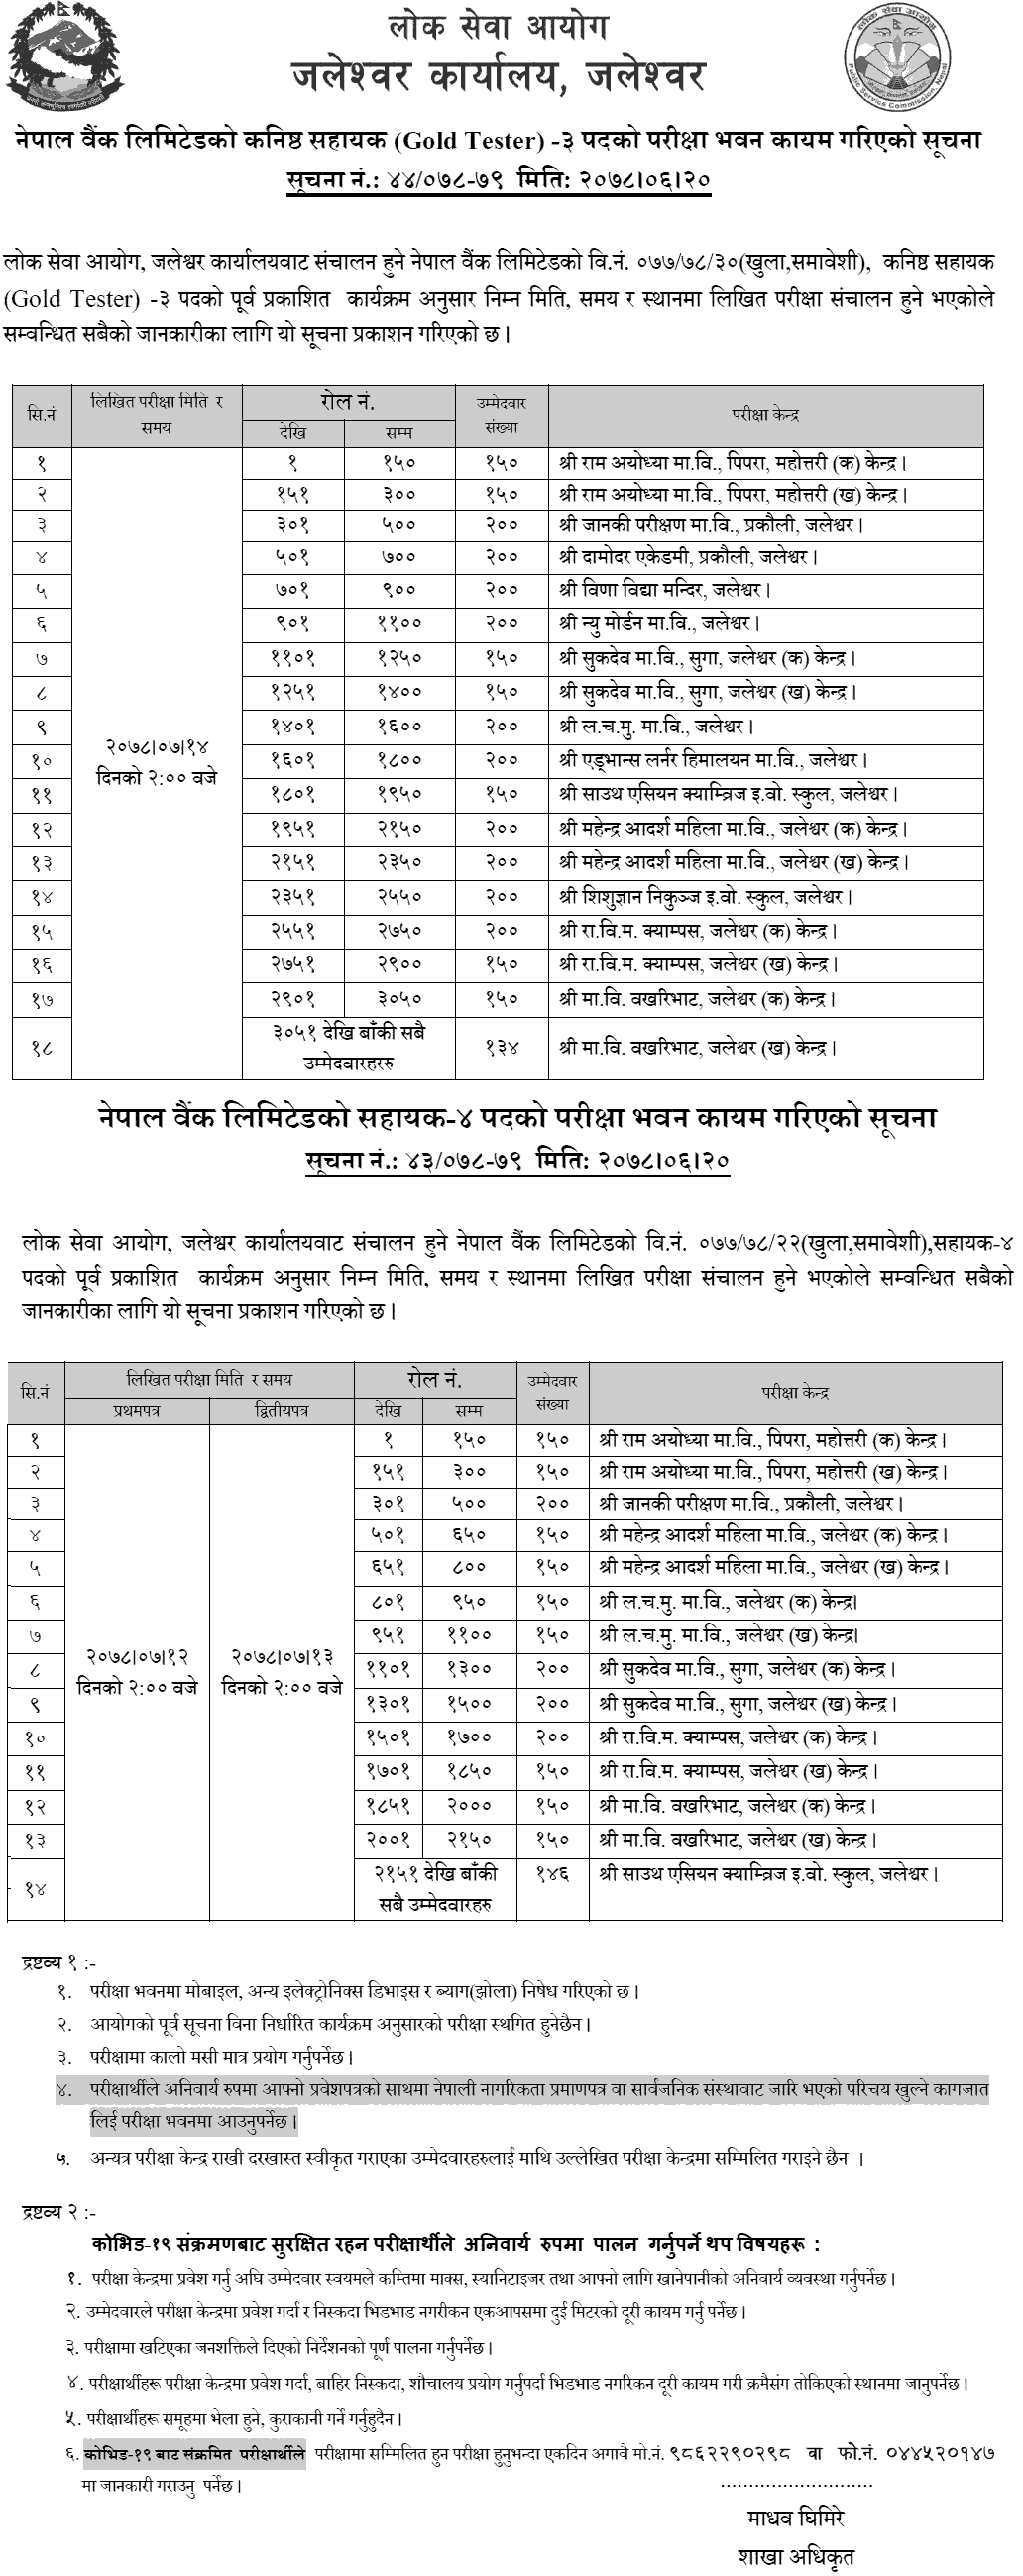 Nepal Bank Limited Gold Tester and Assistant Level  Written Exam Center Jaleshwor